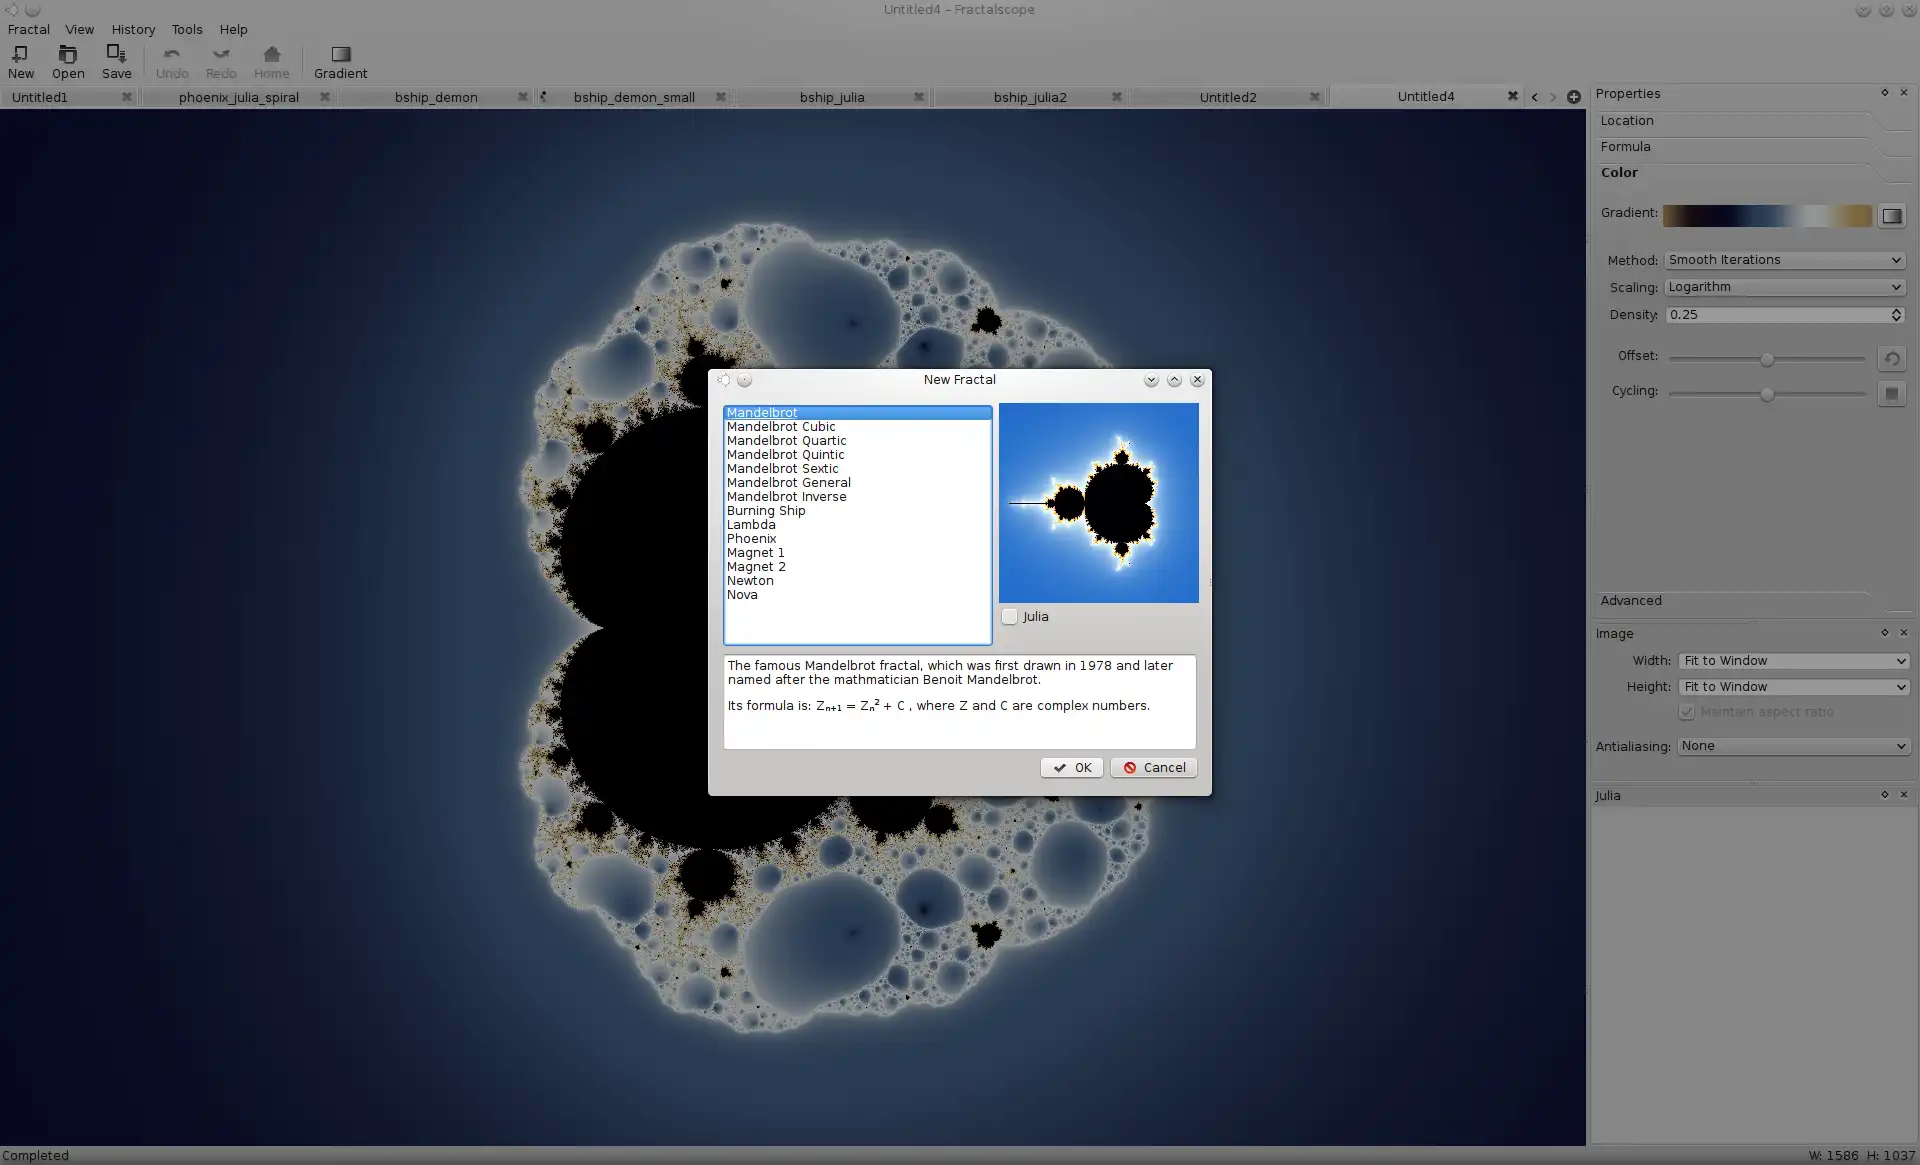 Download web tool or web app Fractalscope